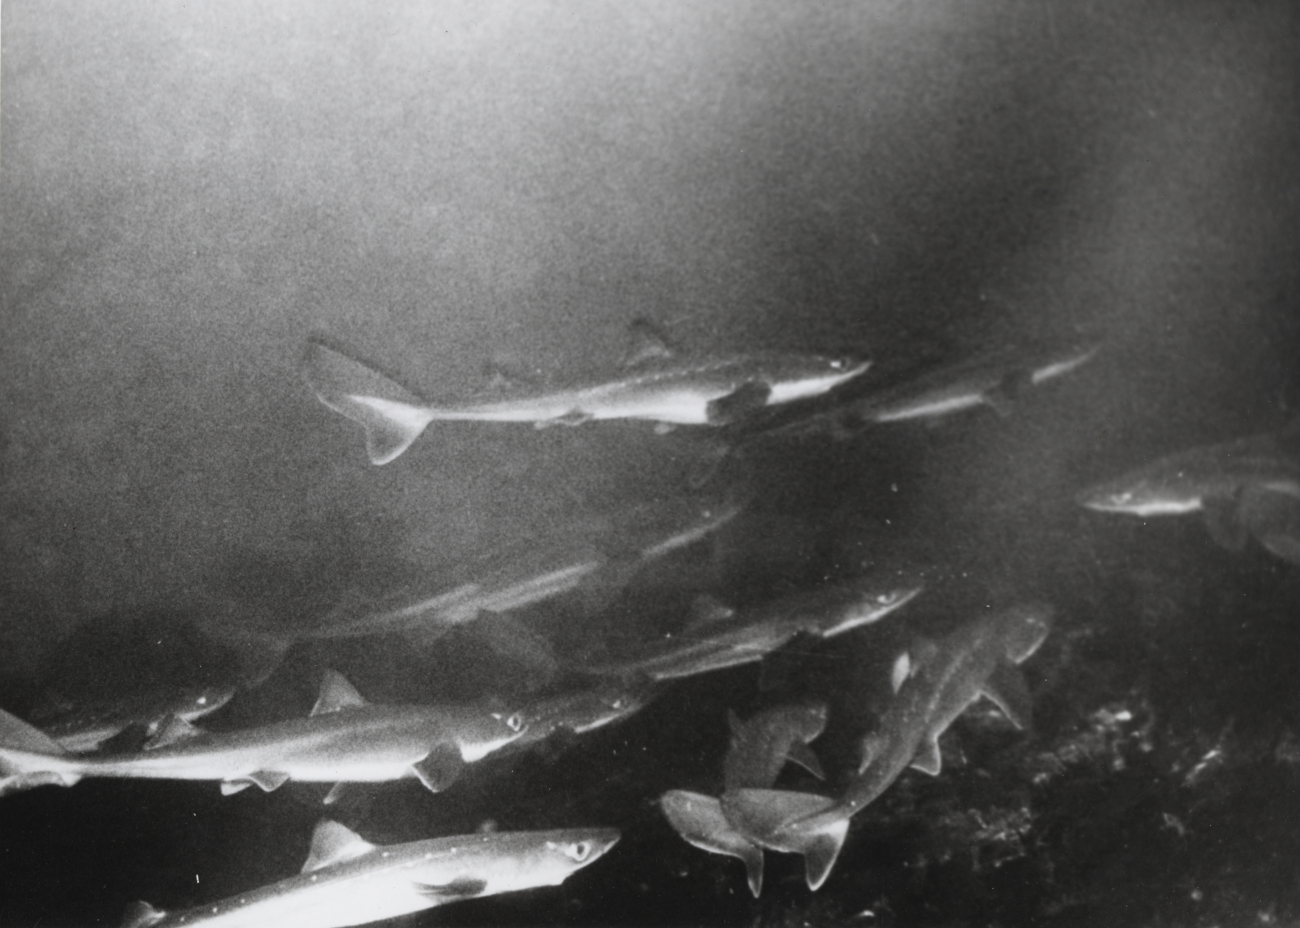 A school of dogfish sharks